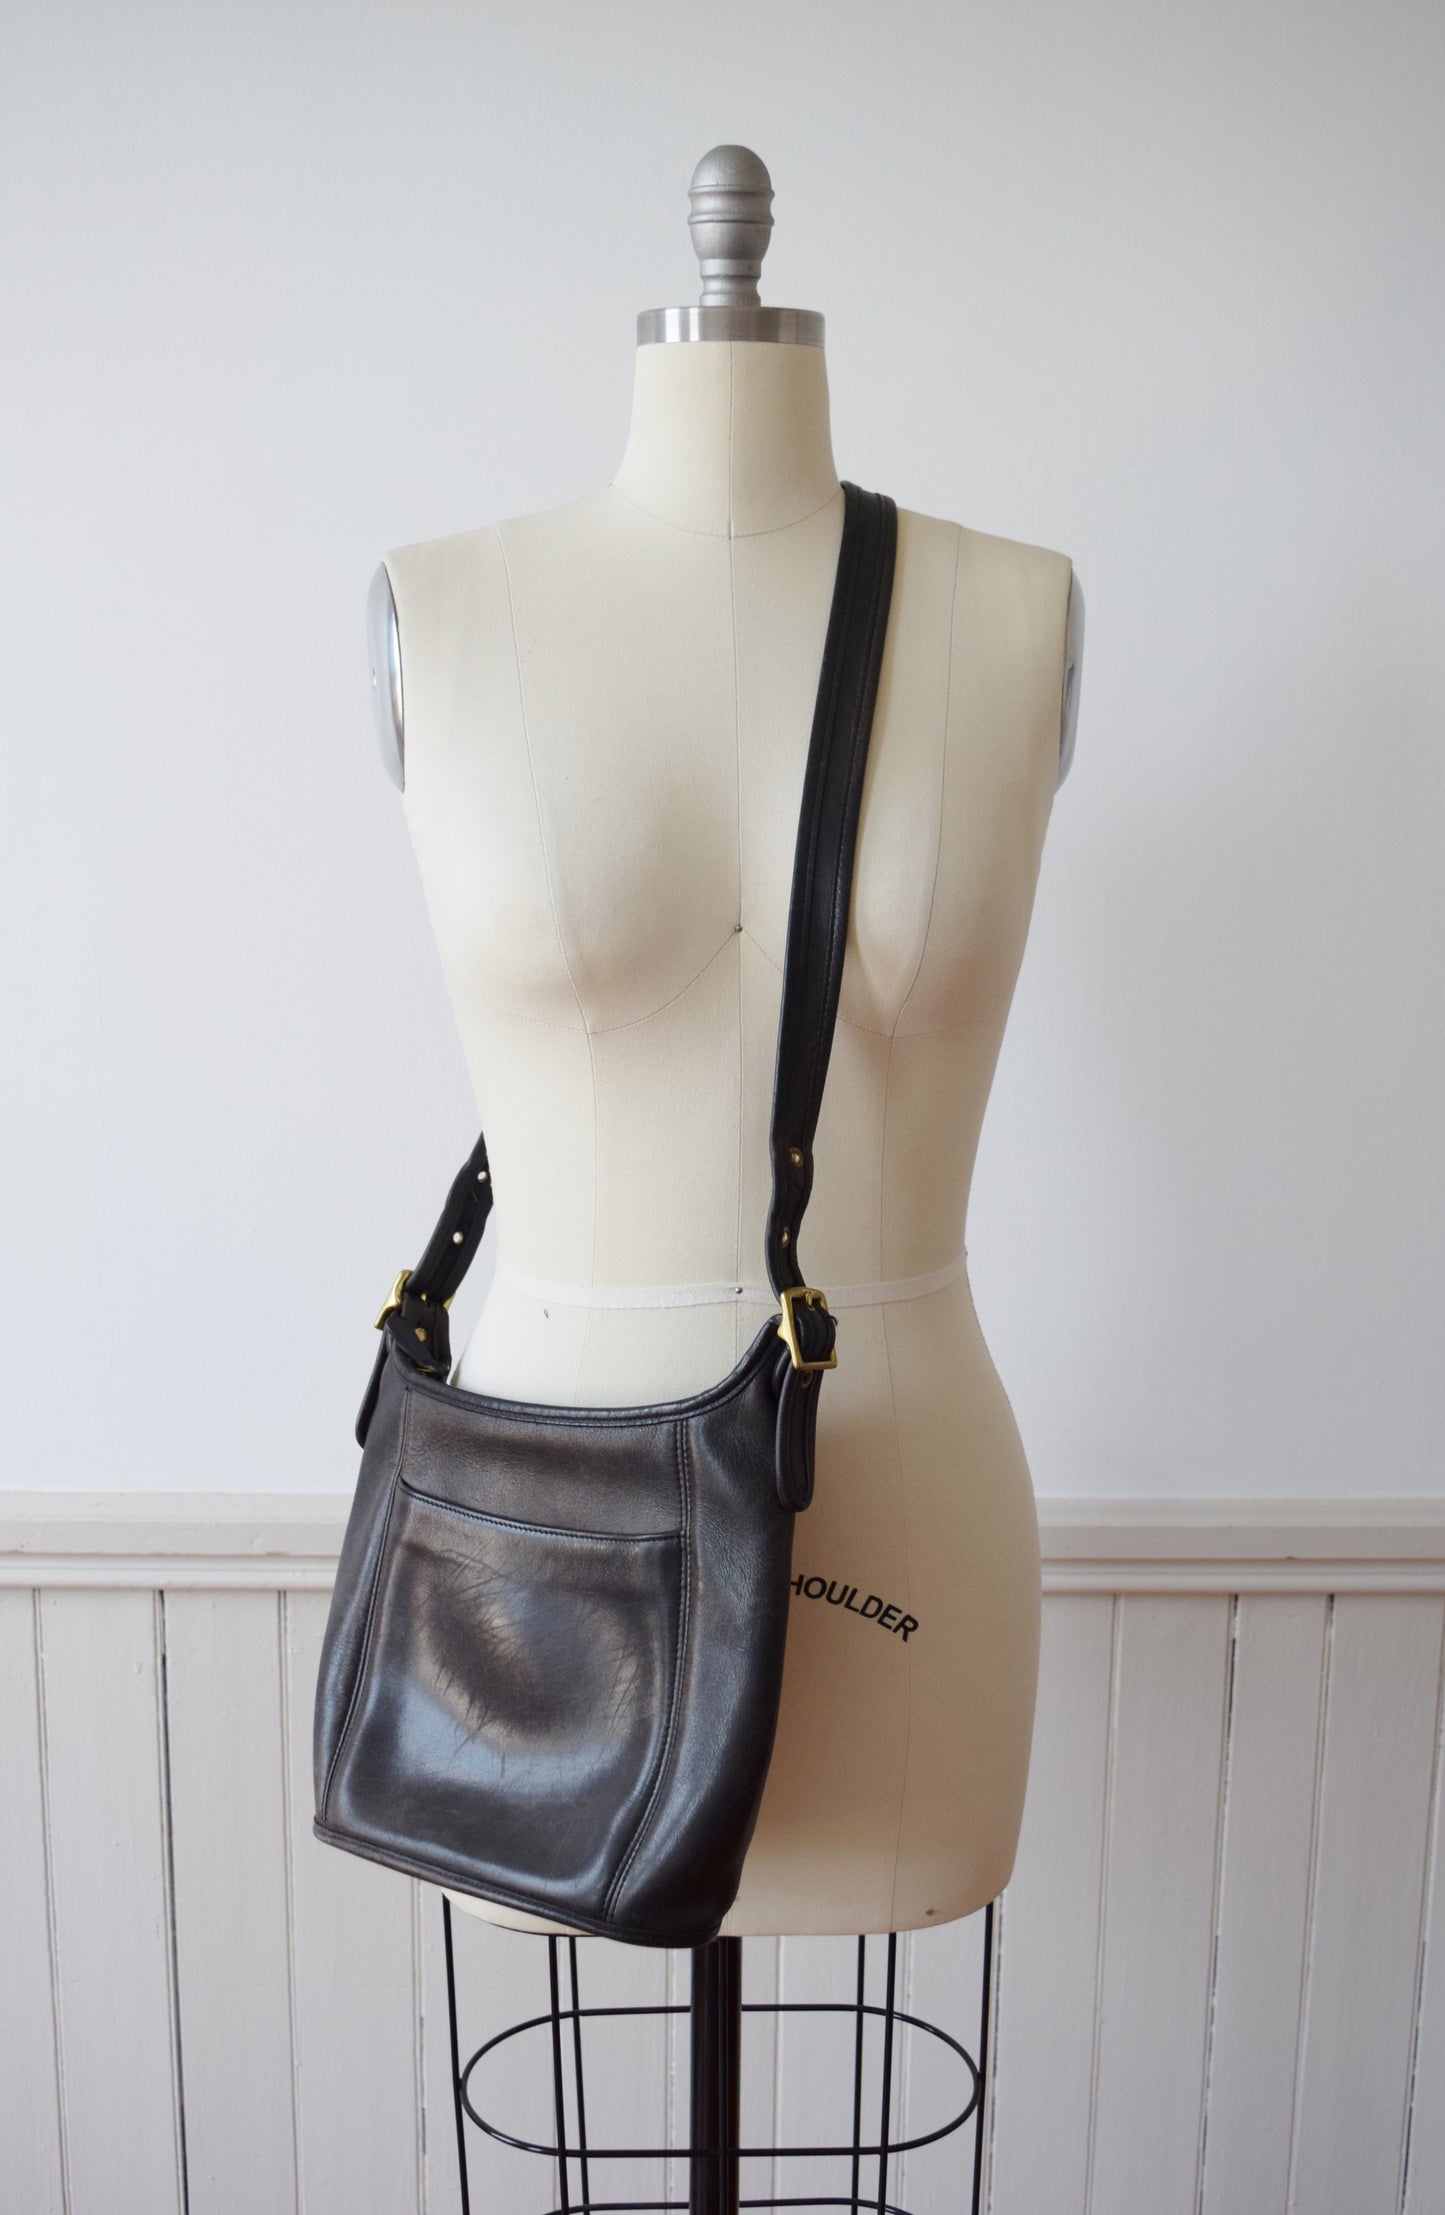 Vintage Coach Legacy Bucket Bag / Purse in Chocolate Brown Leather | No. COC-9816